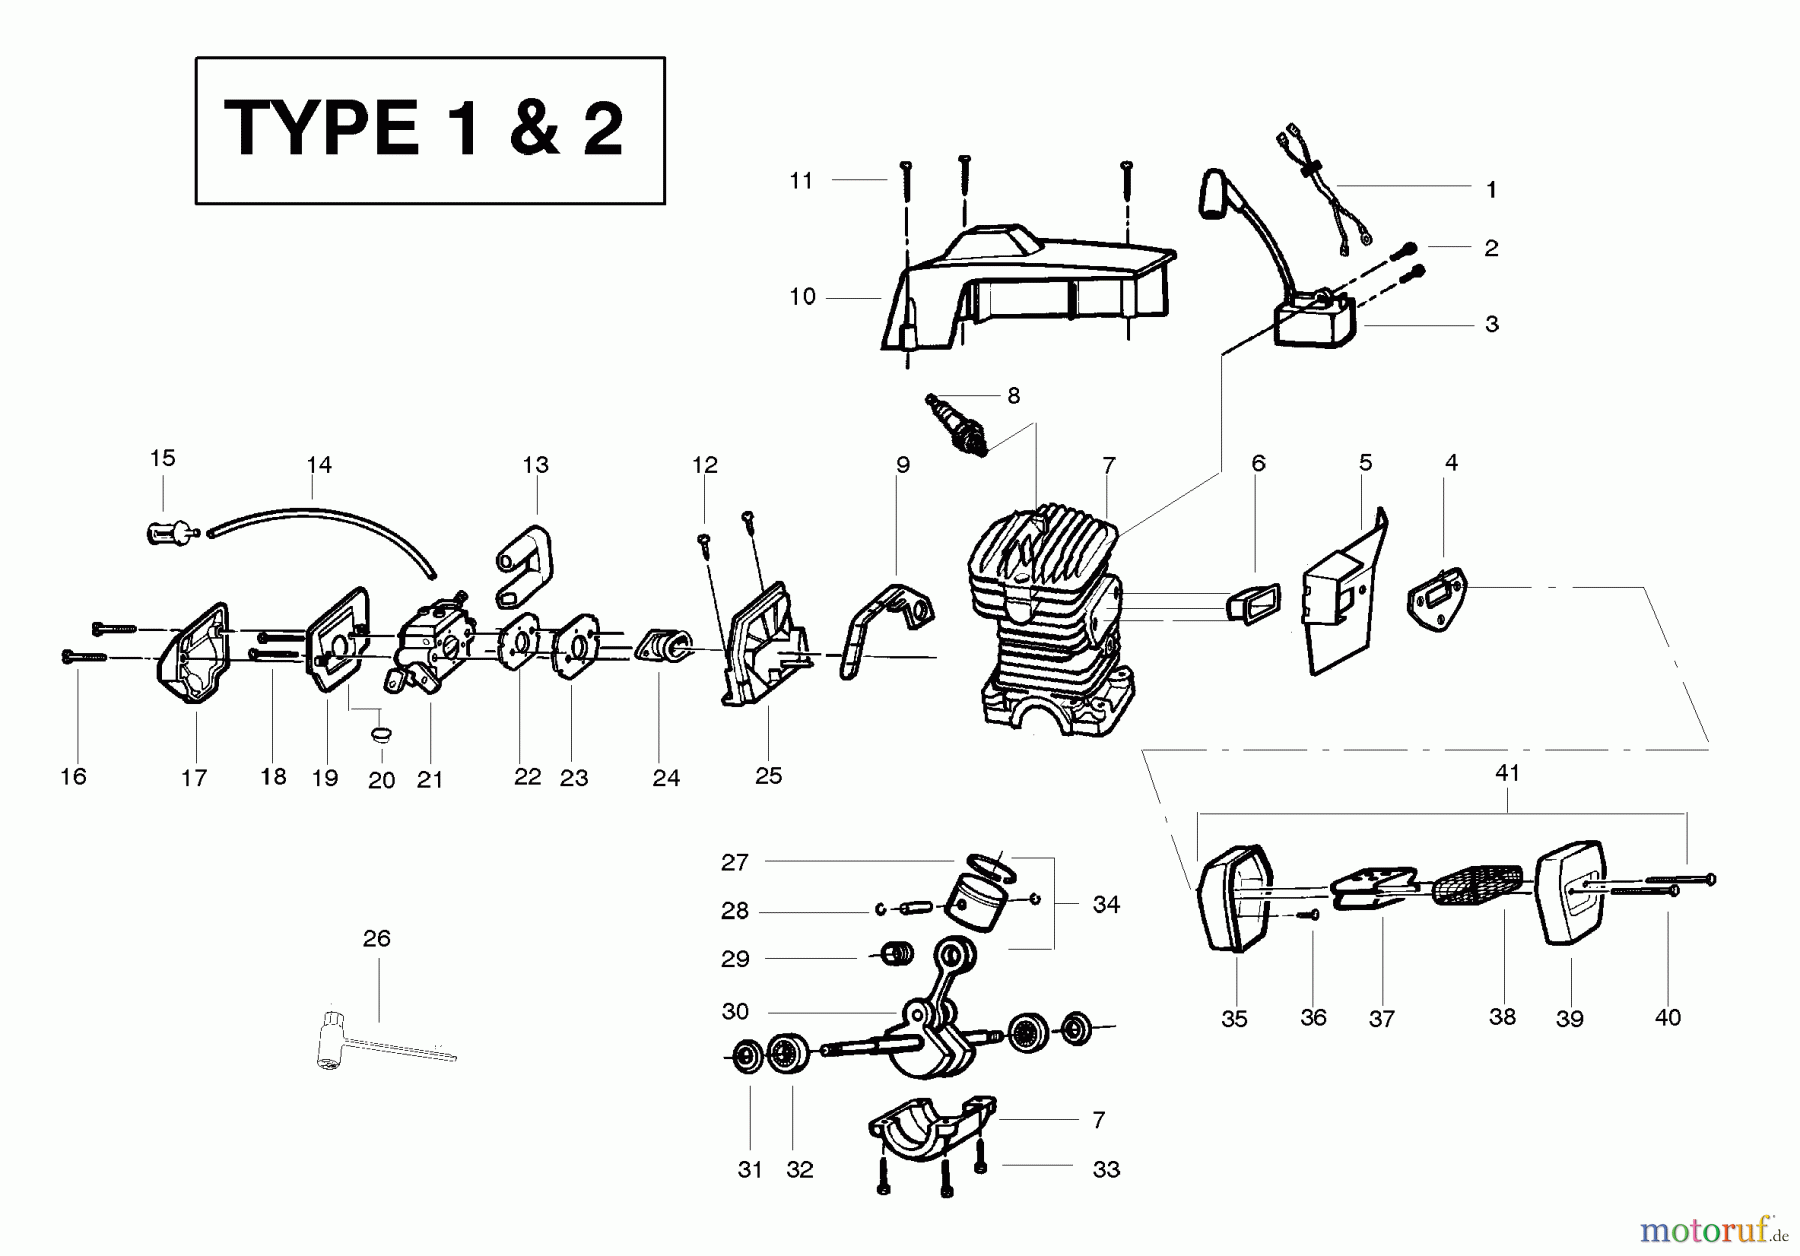  Poulan / Weed Eater Motorsägen PP295 (Type 2) - Poulan Pro Chainsaw Engine Assembly Type 1 & 2